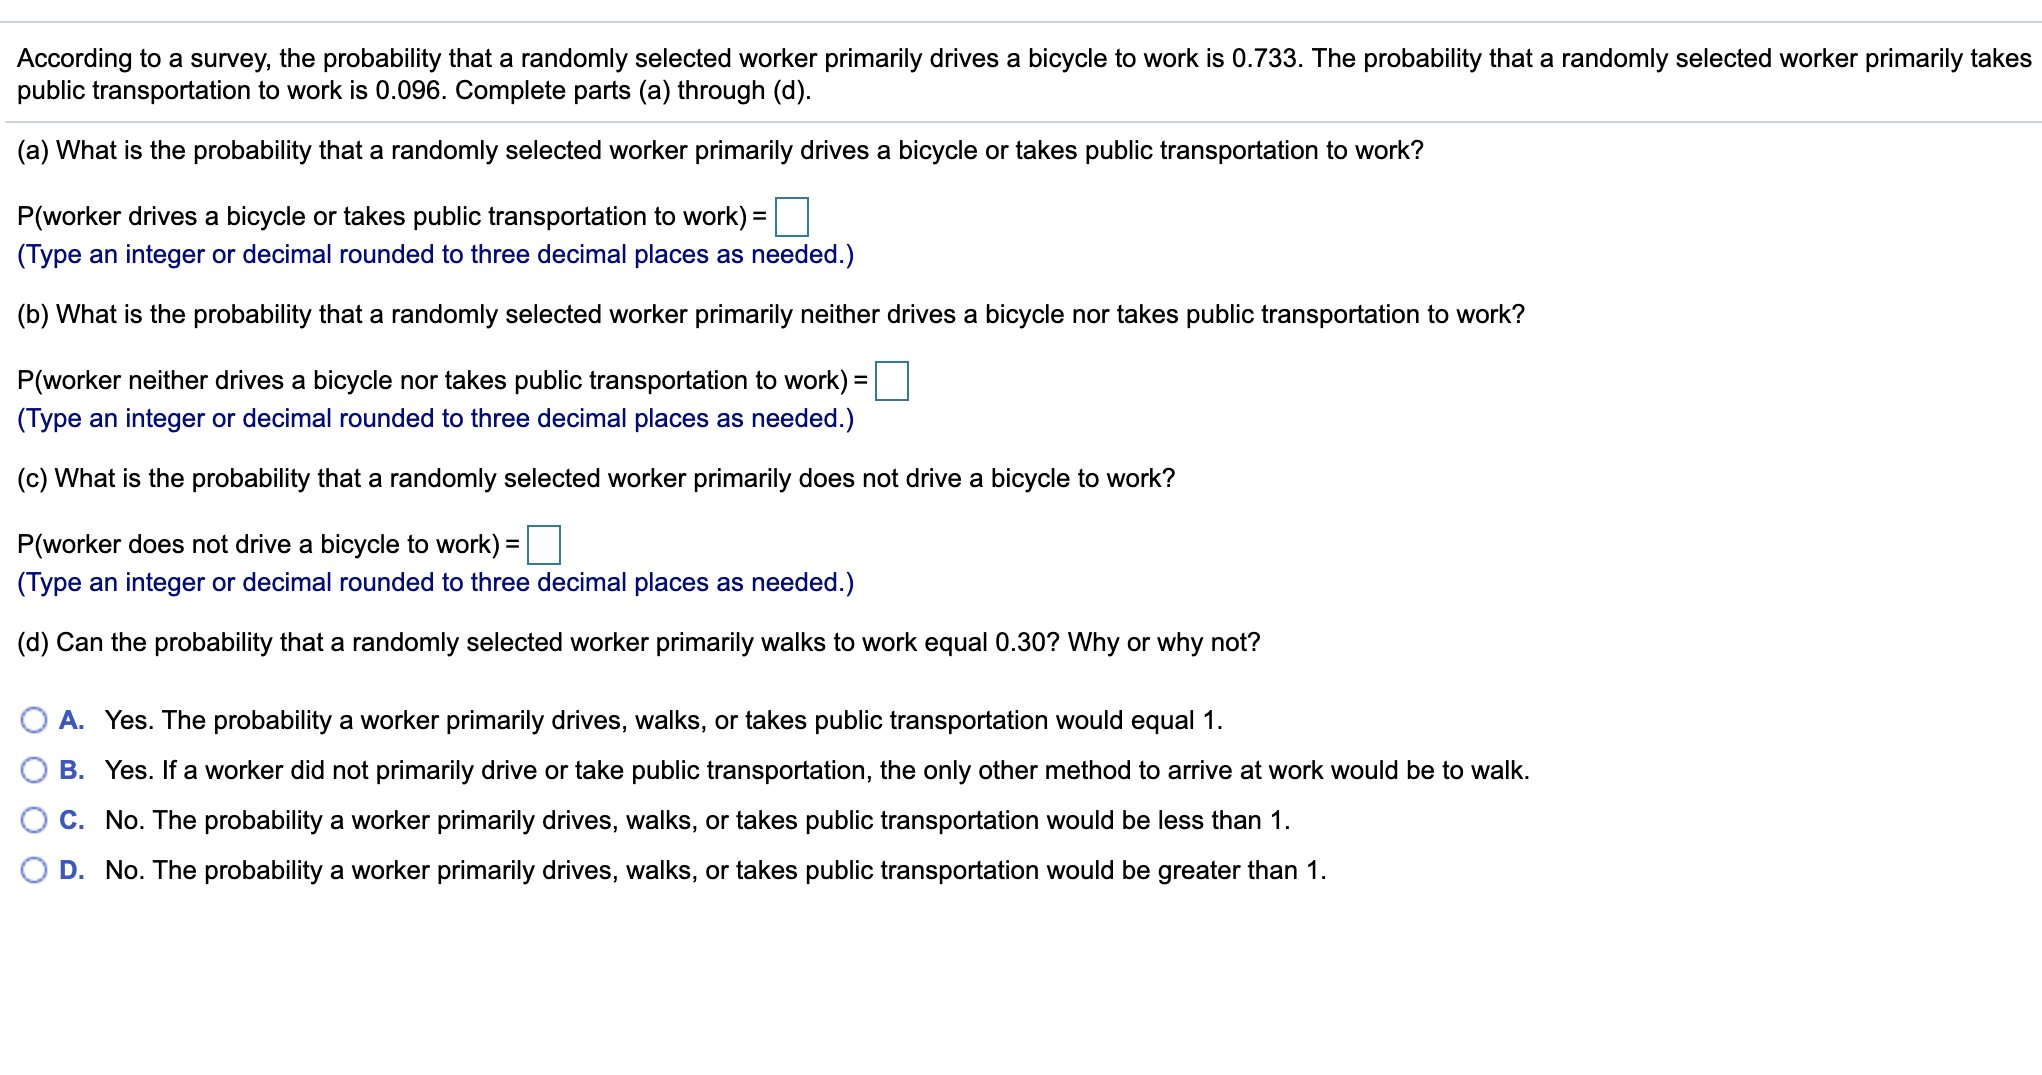 (a) What is the probability that a randomly selected worker primarily drives a bicycle or takes public transportation to work?
P(worker drives a bicycle or takes public transportation to work) =|
(Type an integer or decimal rounded to three decimal places as needed.)
%3D
(b) What is the probability that a randomly selected worker primarily neither drives a bicycle nor takes public transportation to work?
P(worker neither drives a bicycle nor takes public transportation to work) =
(Type an integer or decimal rounded to three decimal places as needed.)
(c) What is the probability that a randomly selected worker primarily does not drive a bicycle to work?
P(worker does not drive a bicycle to work) =
%3D
(Type an integer or decimal rounded to three decimal places as needed.)
